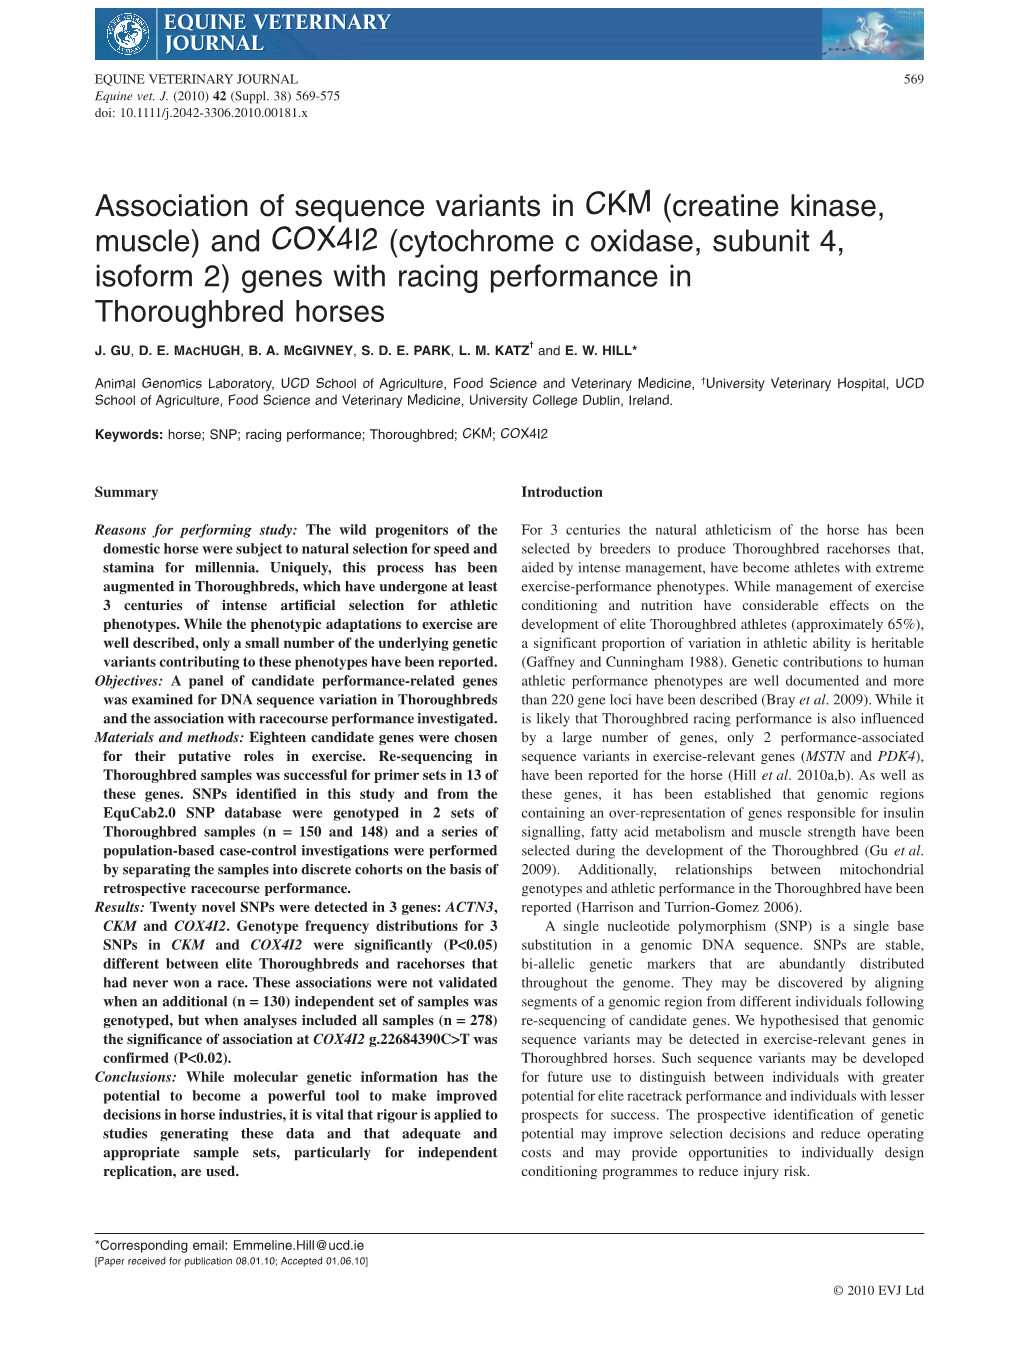 Association of Sequence Variants in CKM (Creatine Kinase, Muscle) And